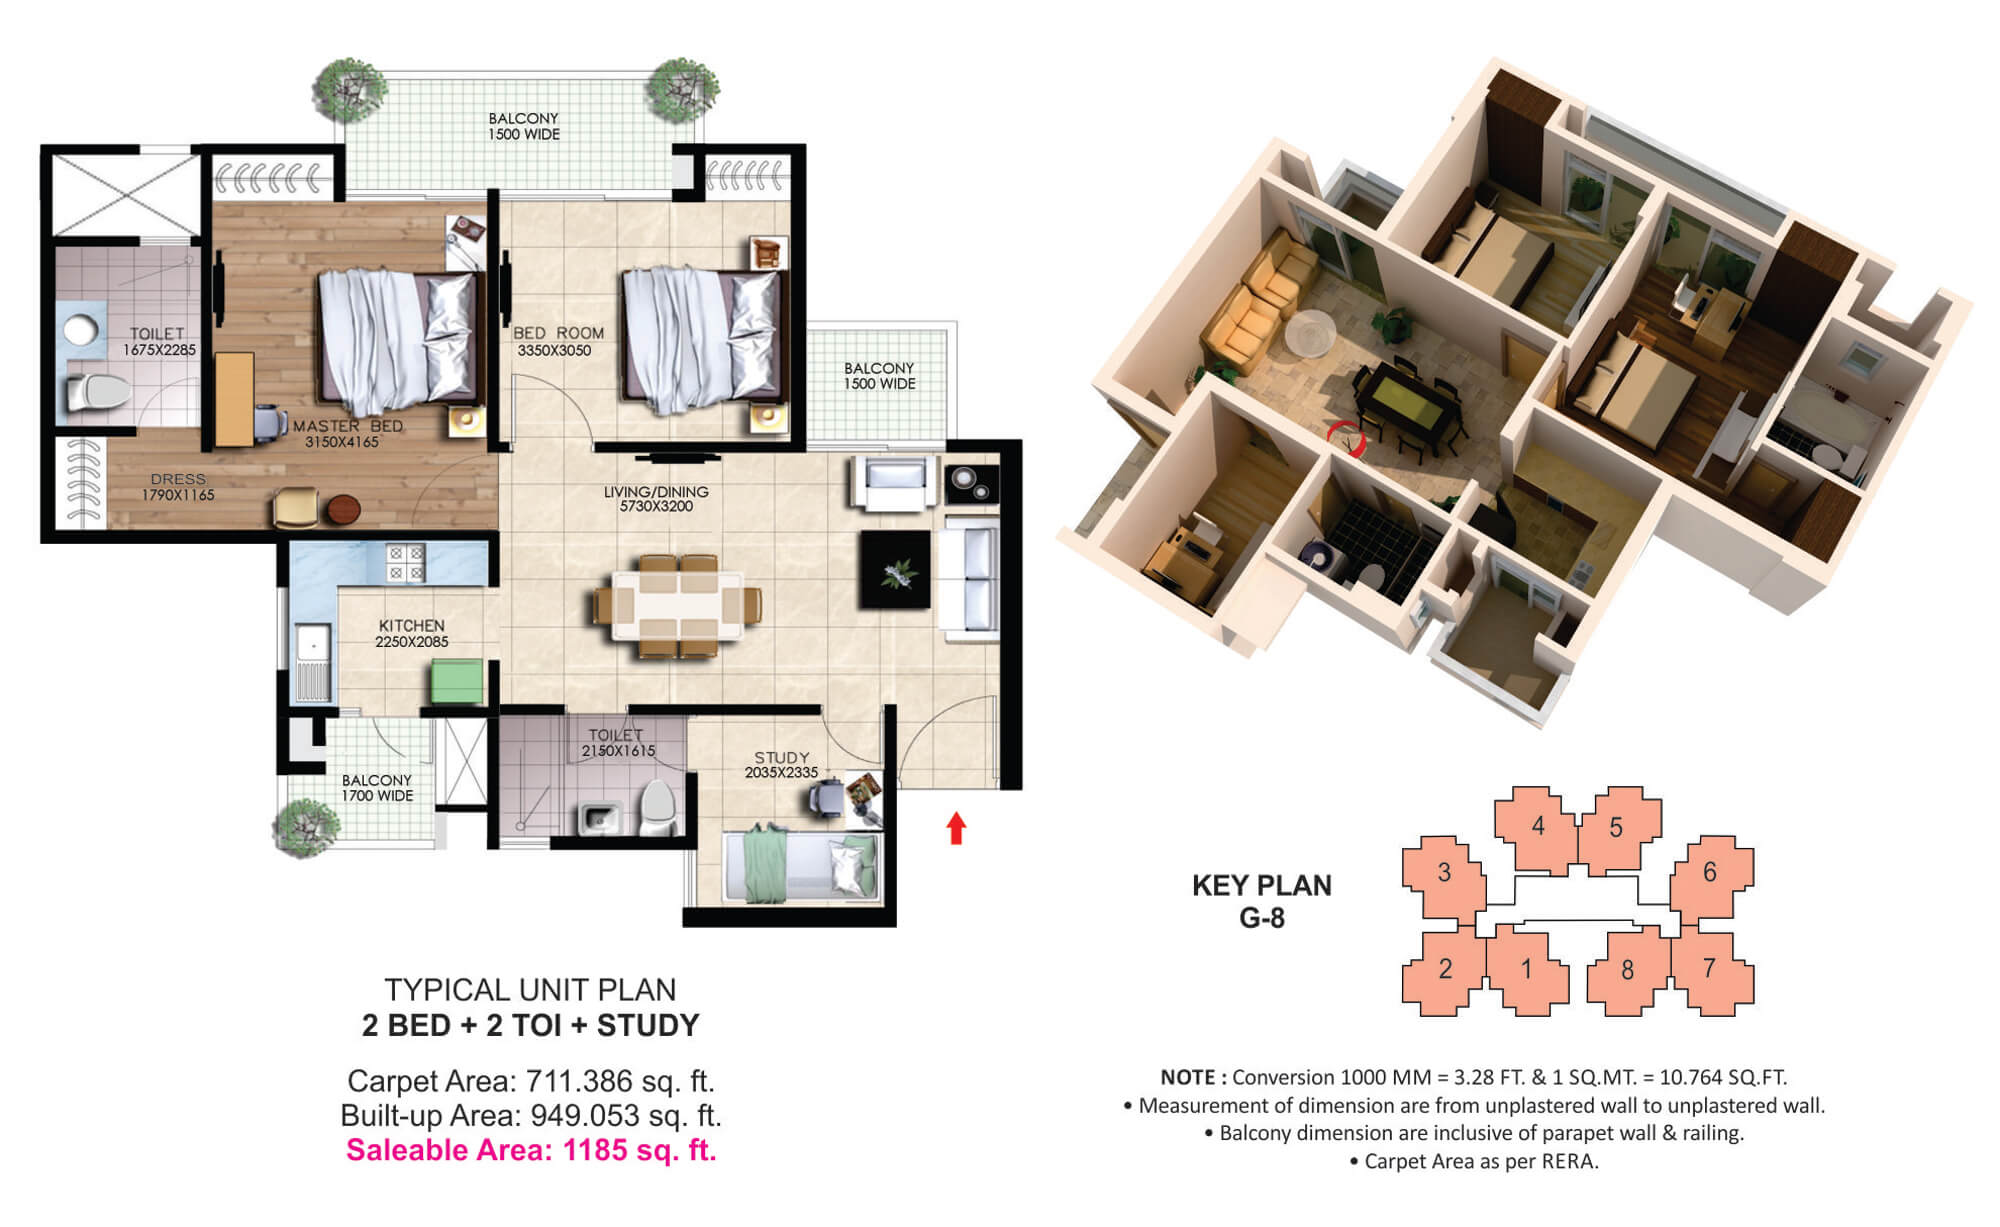 The floor plan size of 2 BHK Flat is 10185 sq ft.